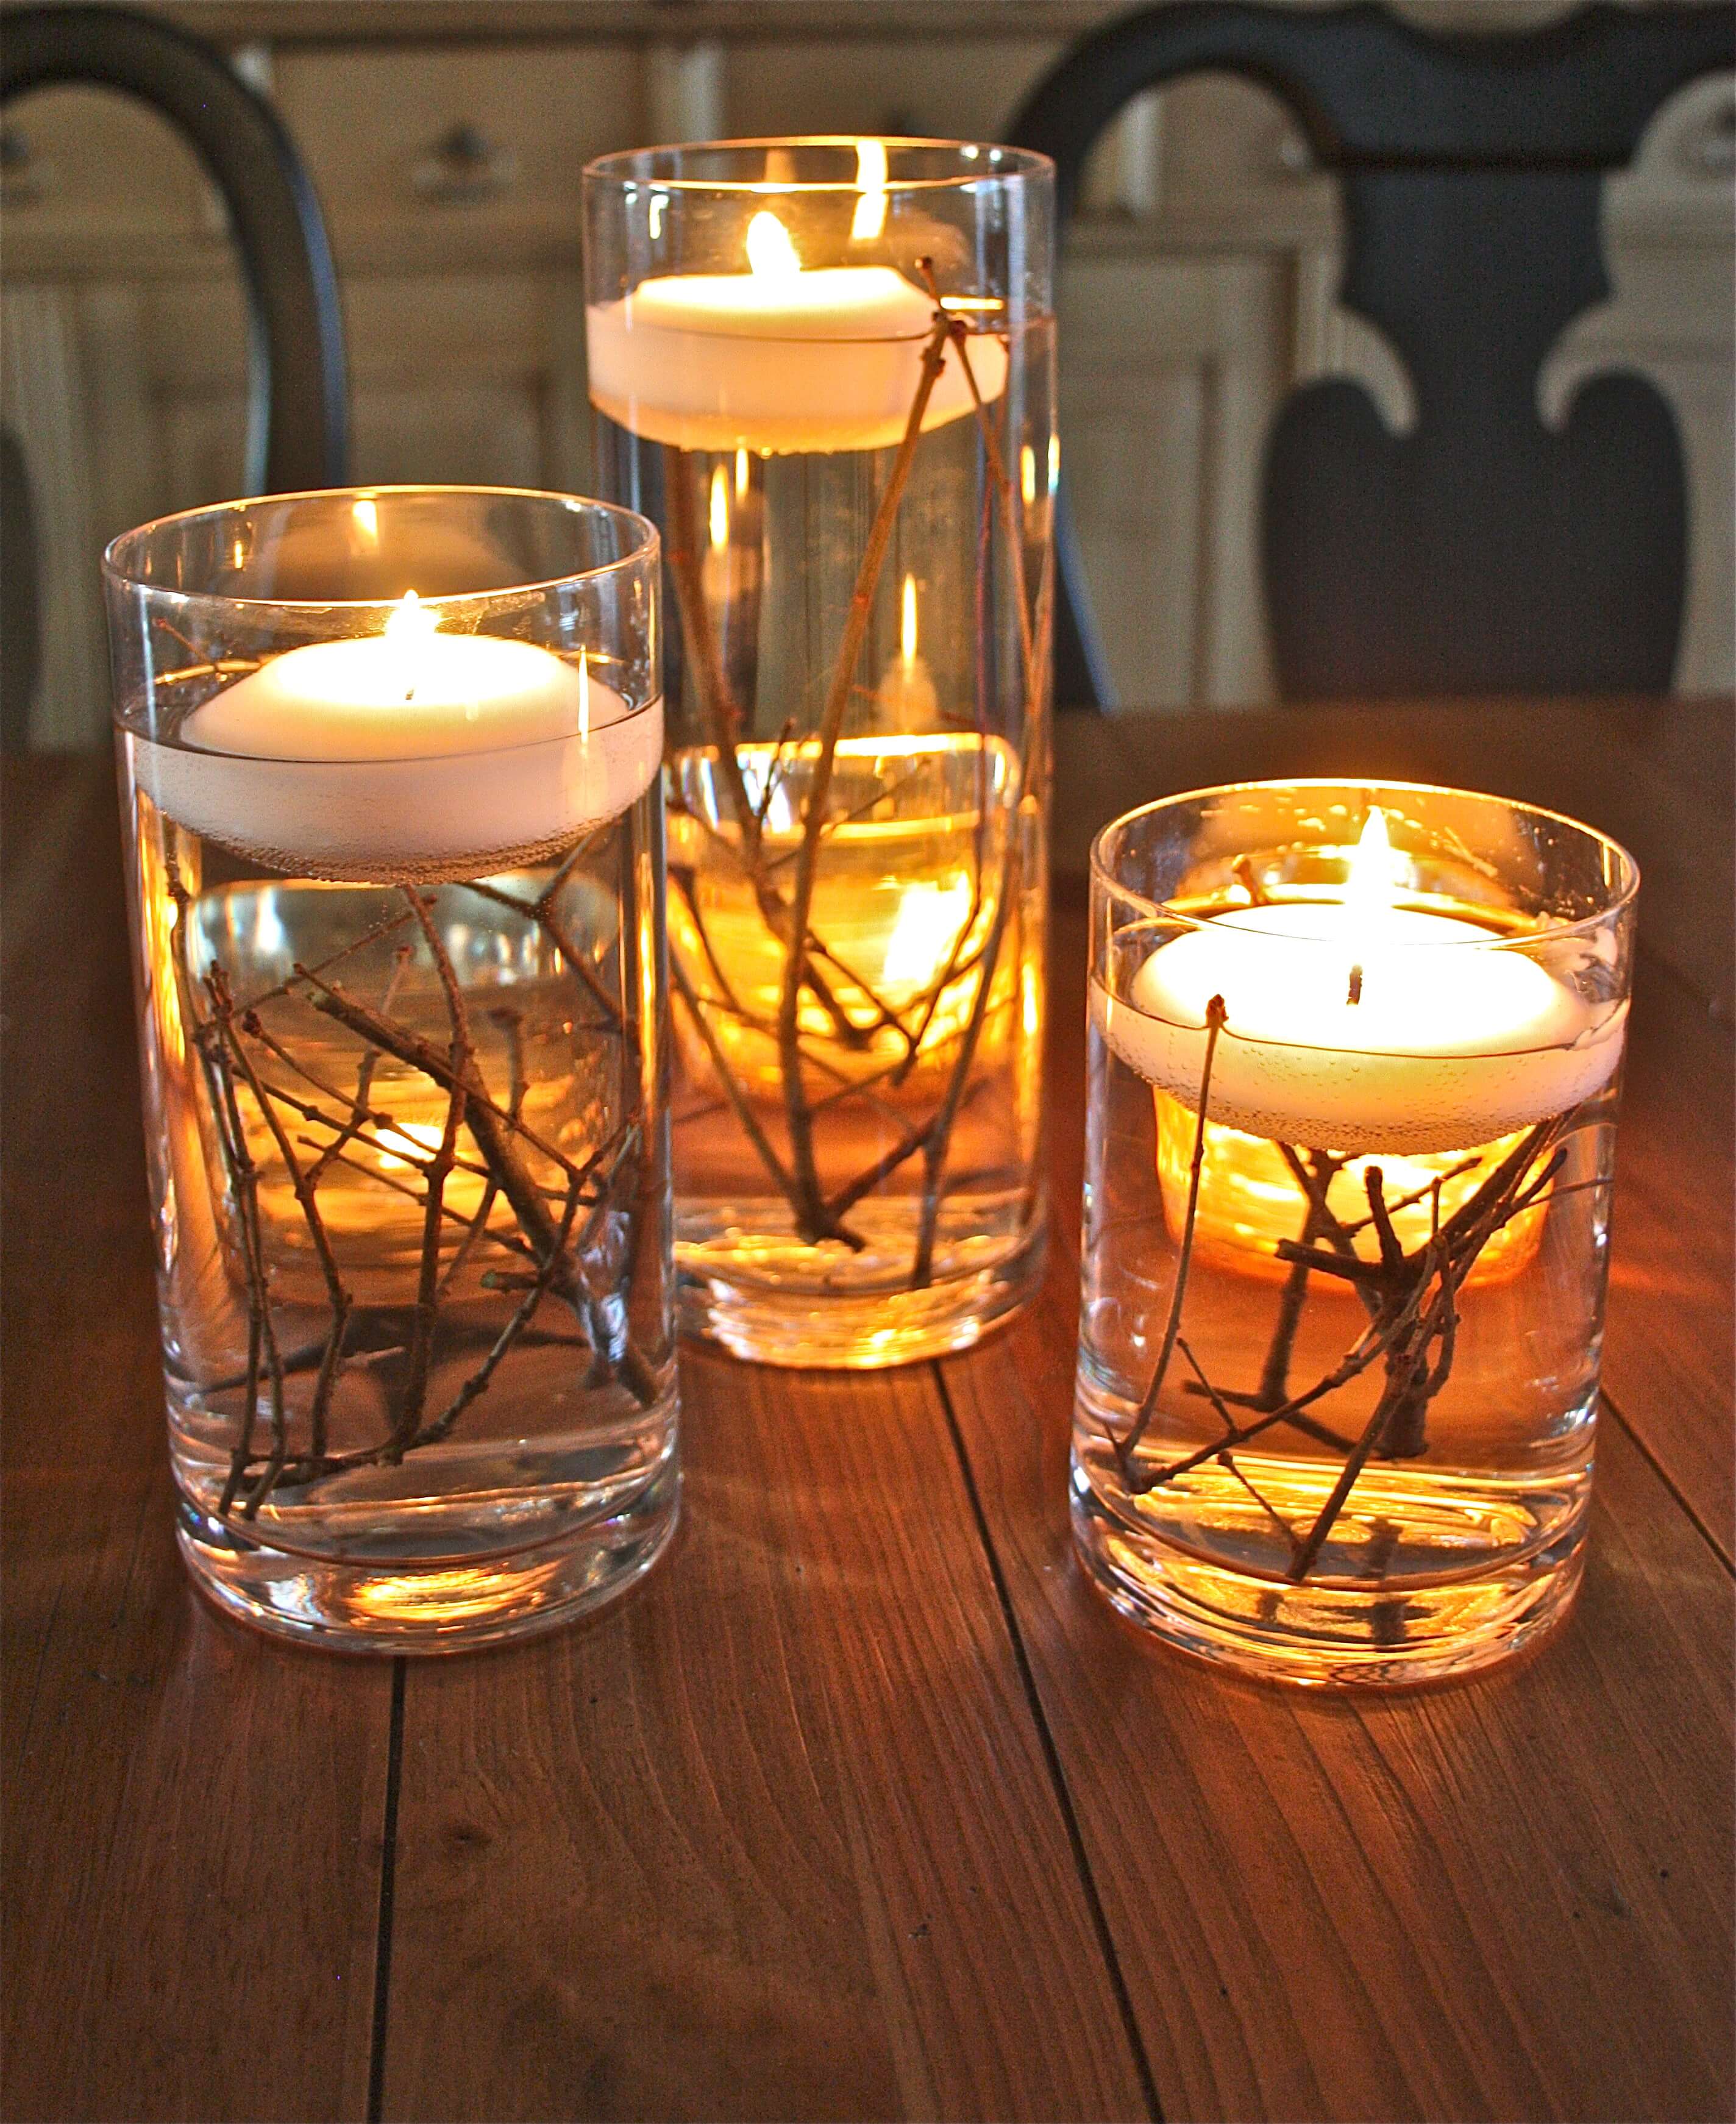 DIY kitchen candles for fall decor or Thanksgiving meals